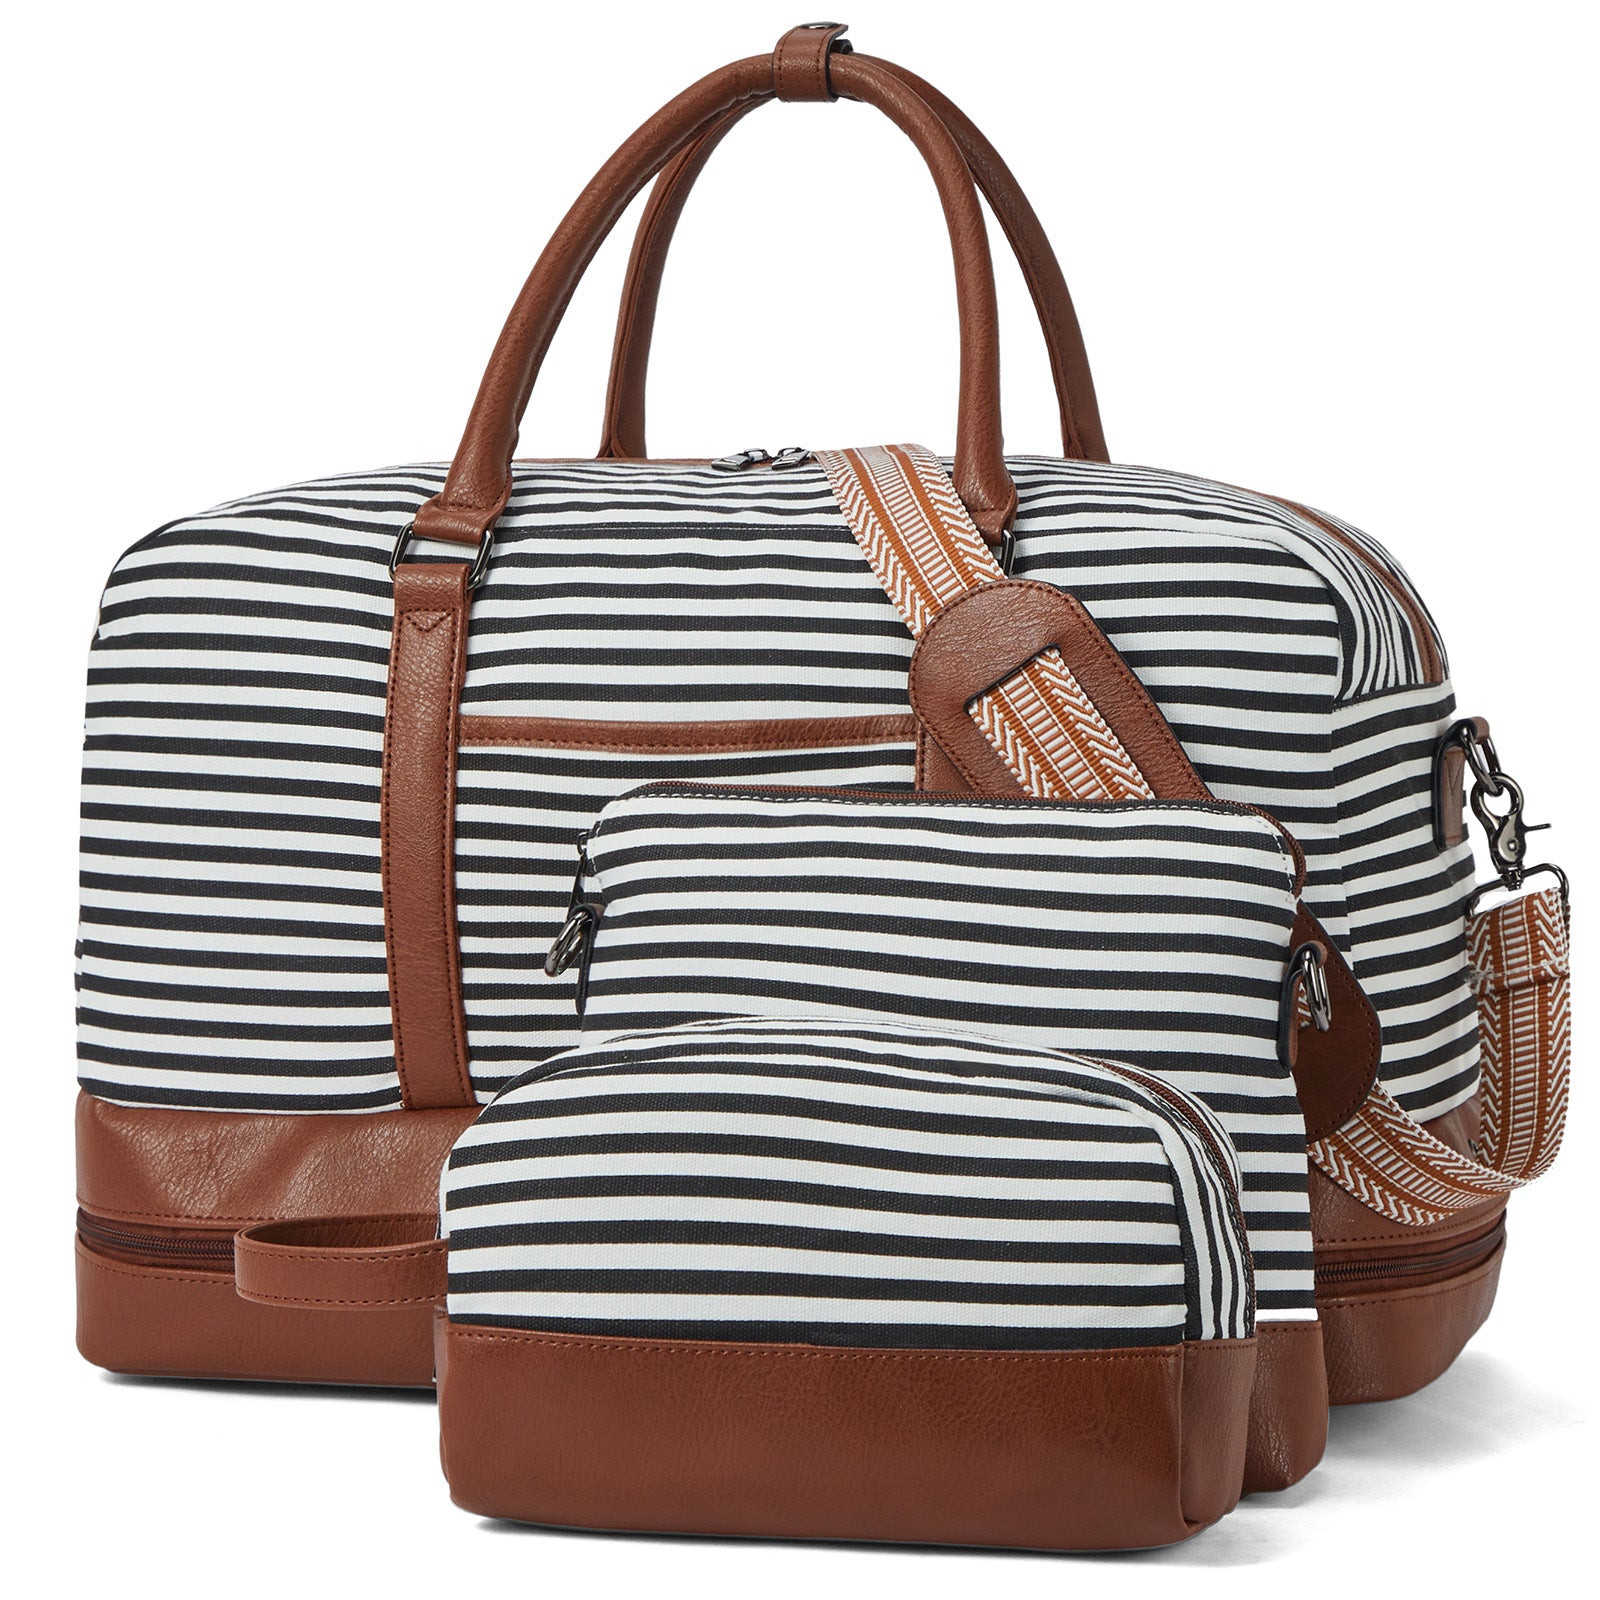 Zenobe Top Weekender Bag with Bottom Shoe Compartment for Travelers ...